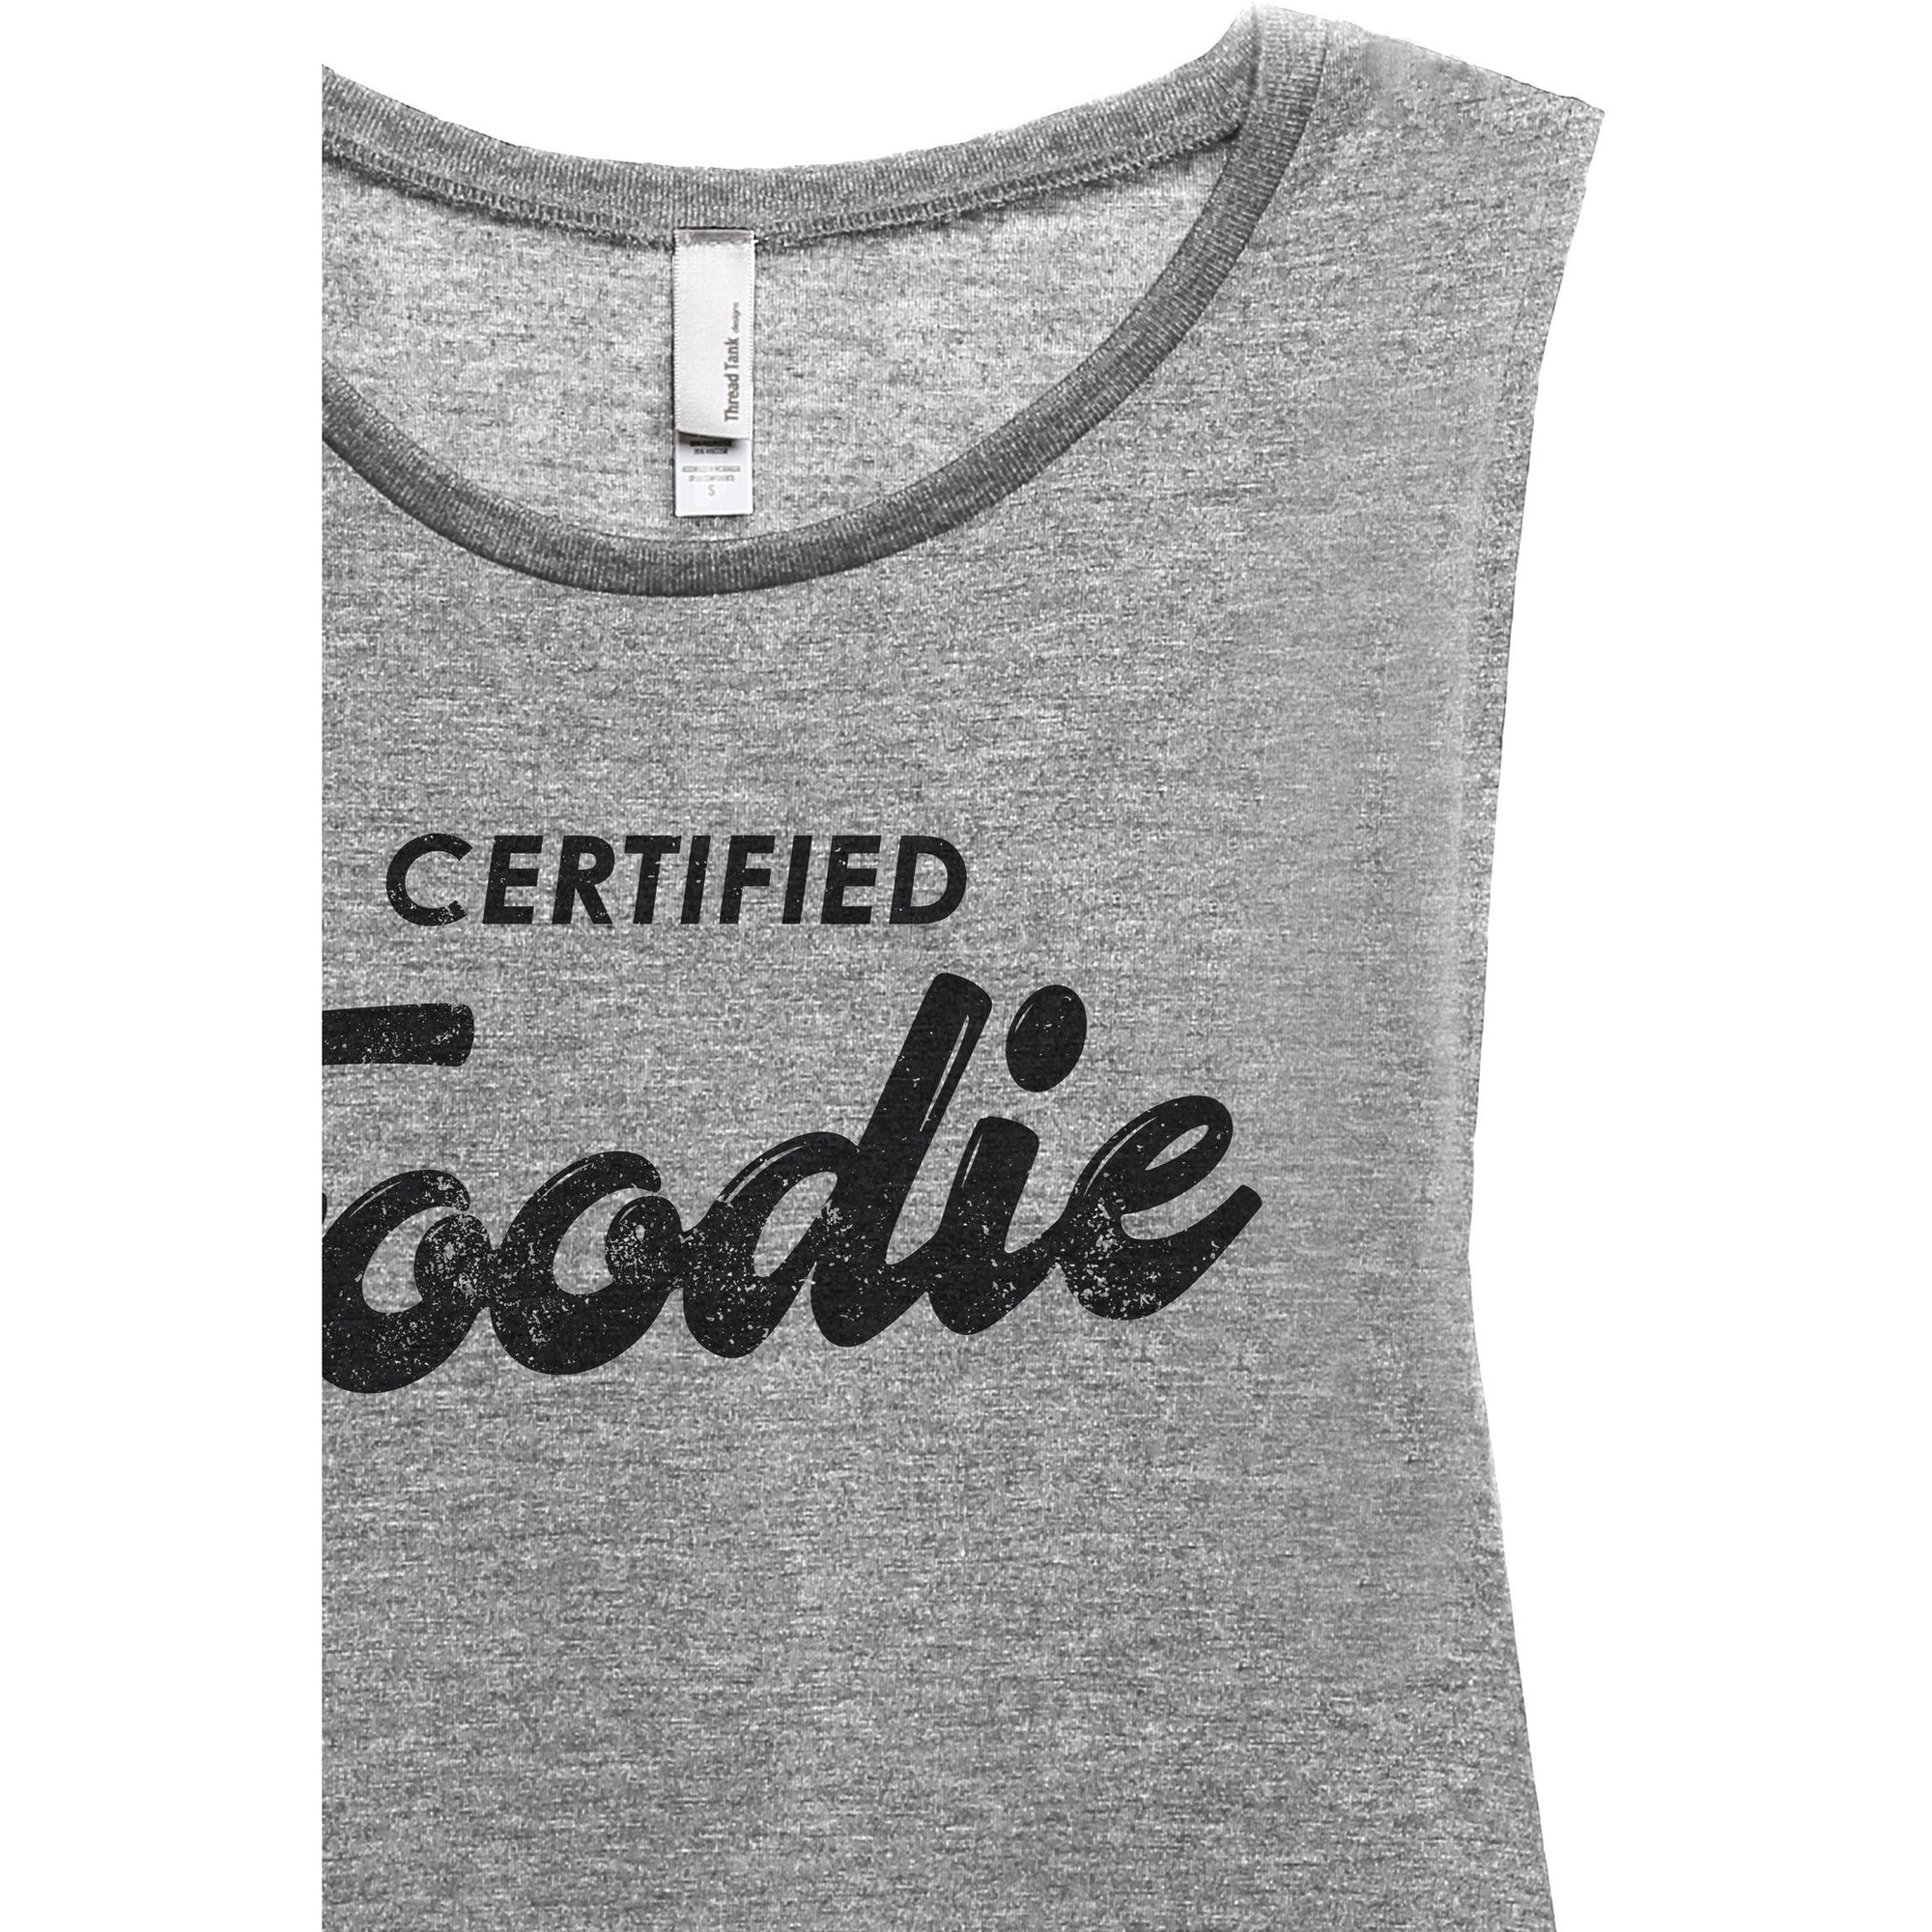 Certified Foodie Women's Relaxed Muscle Tank Tee Heather Grey Closeup Details
